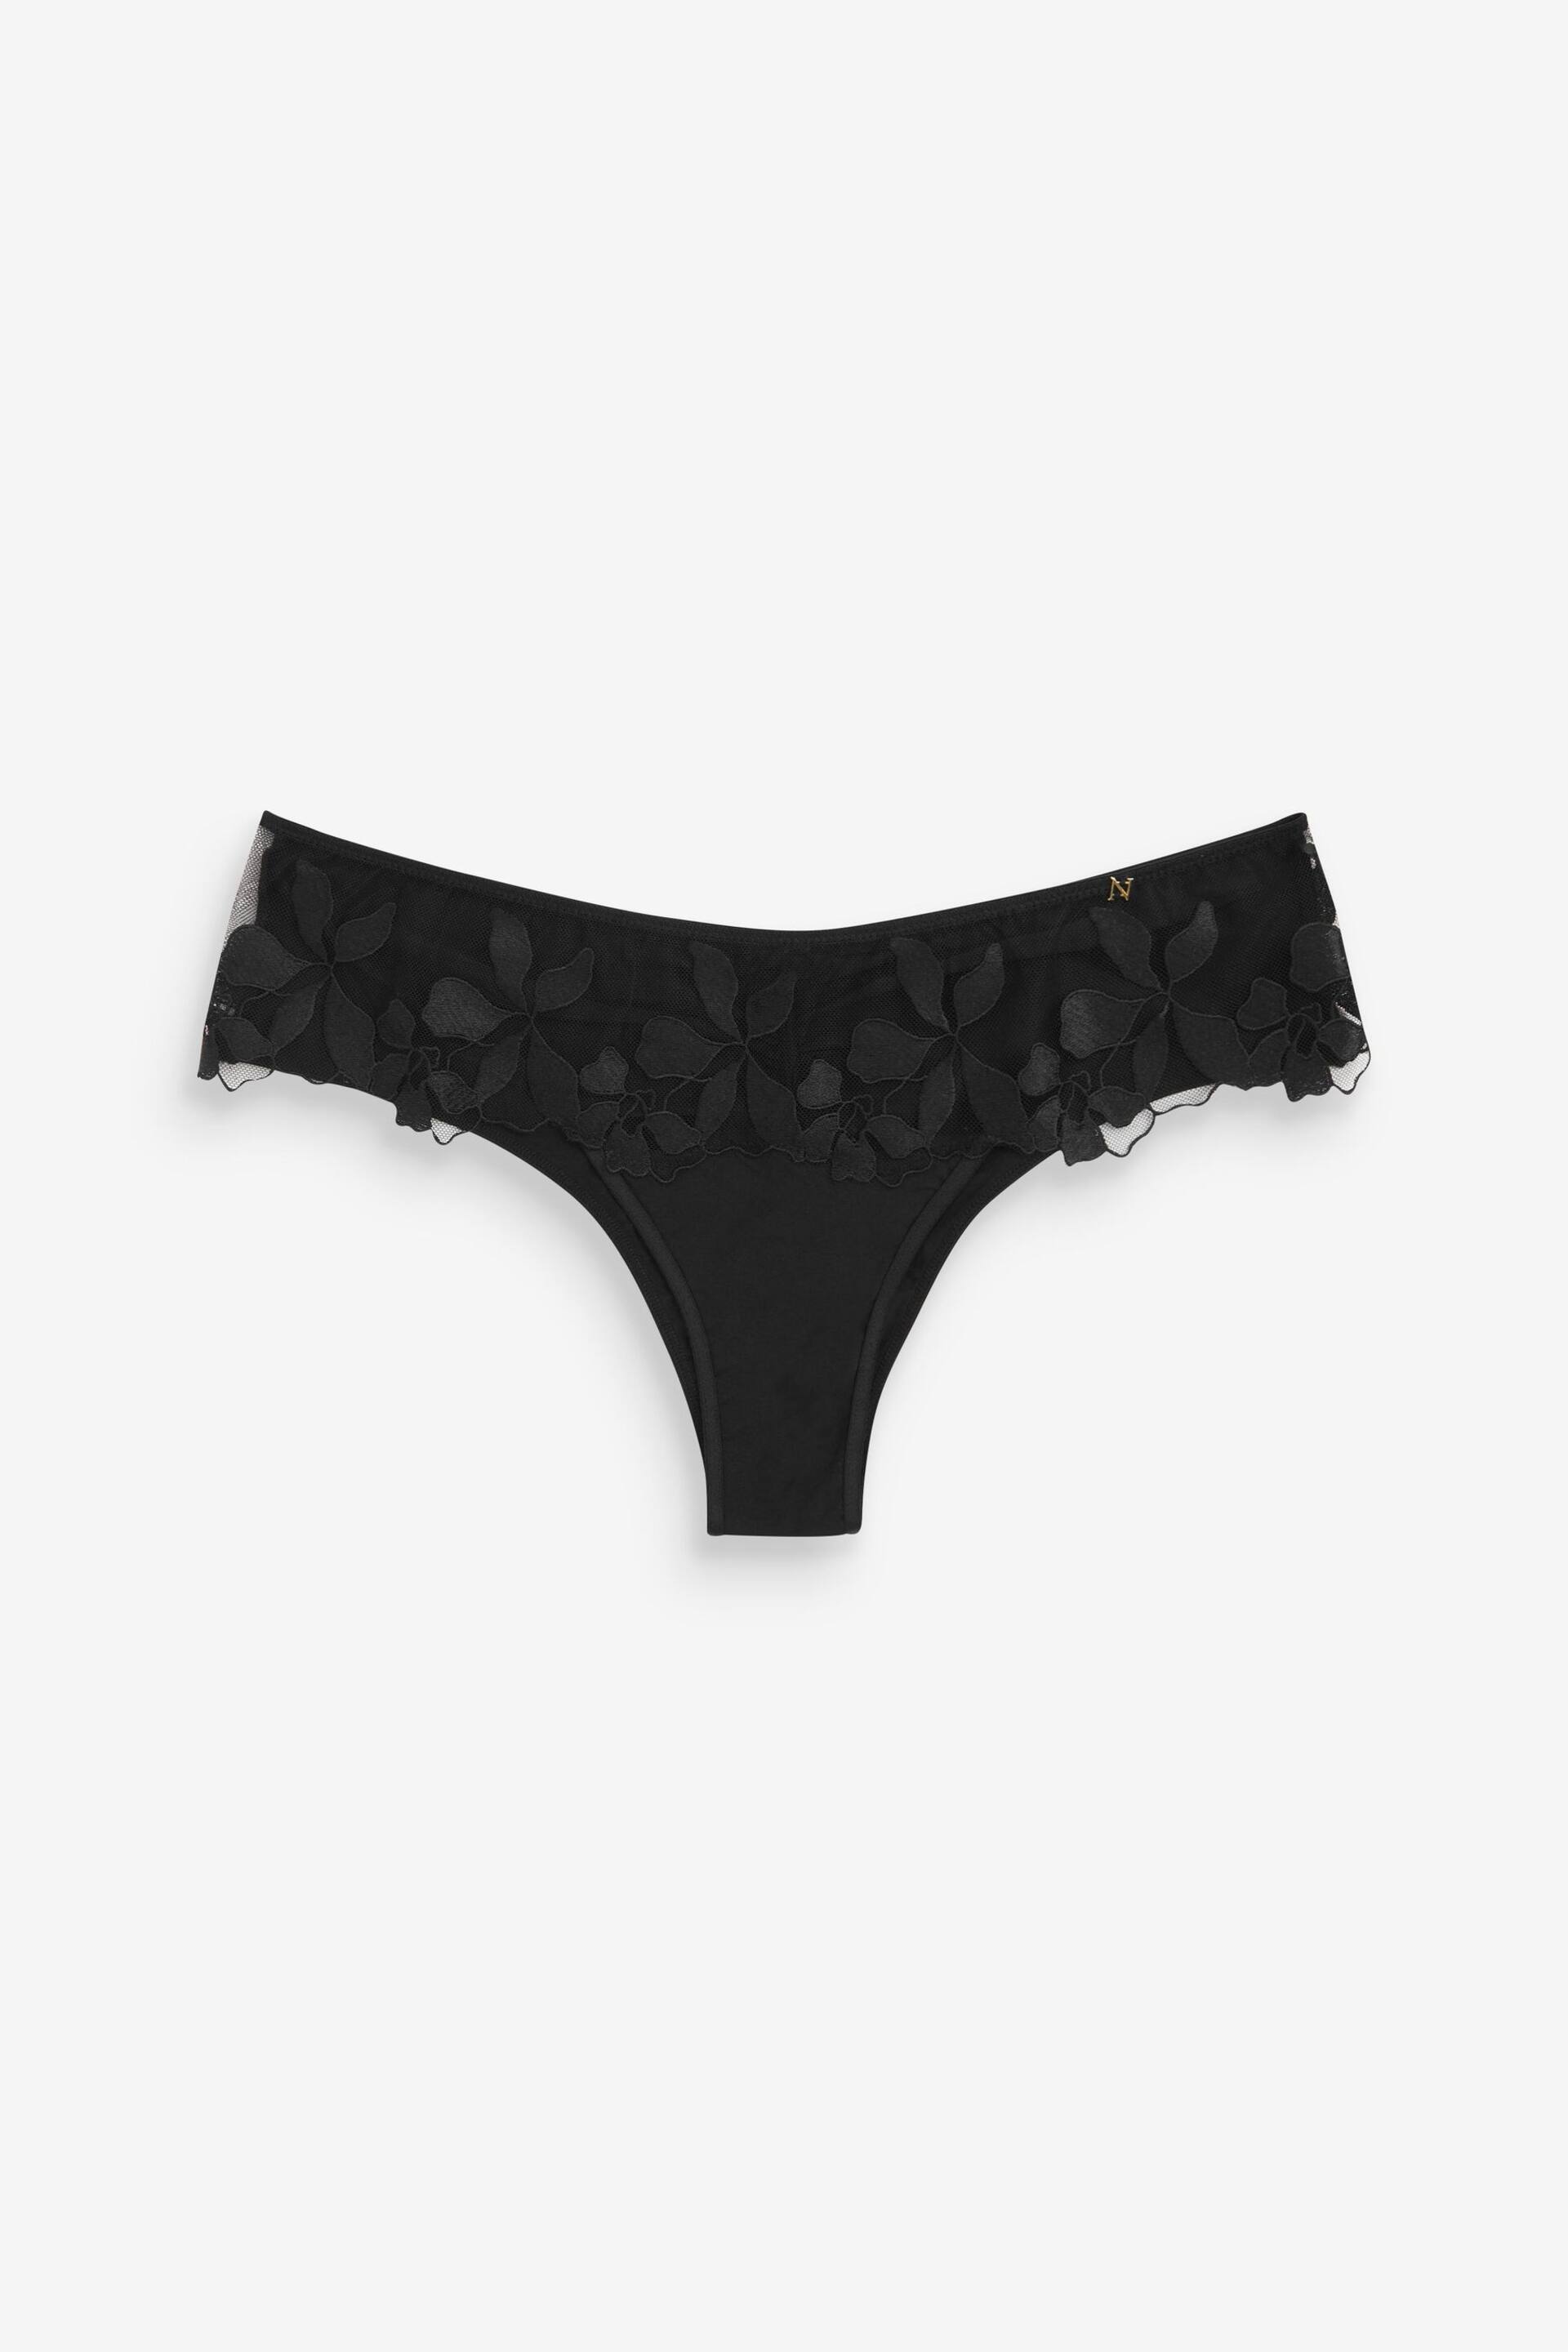 Black Brazilian Floral Embroidered Knickers - Image 5 of 5